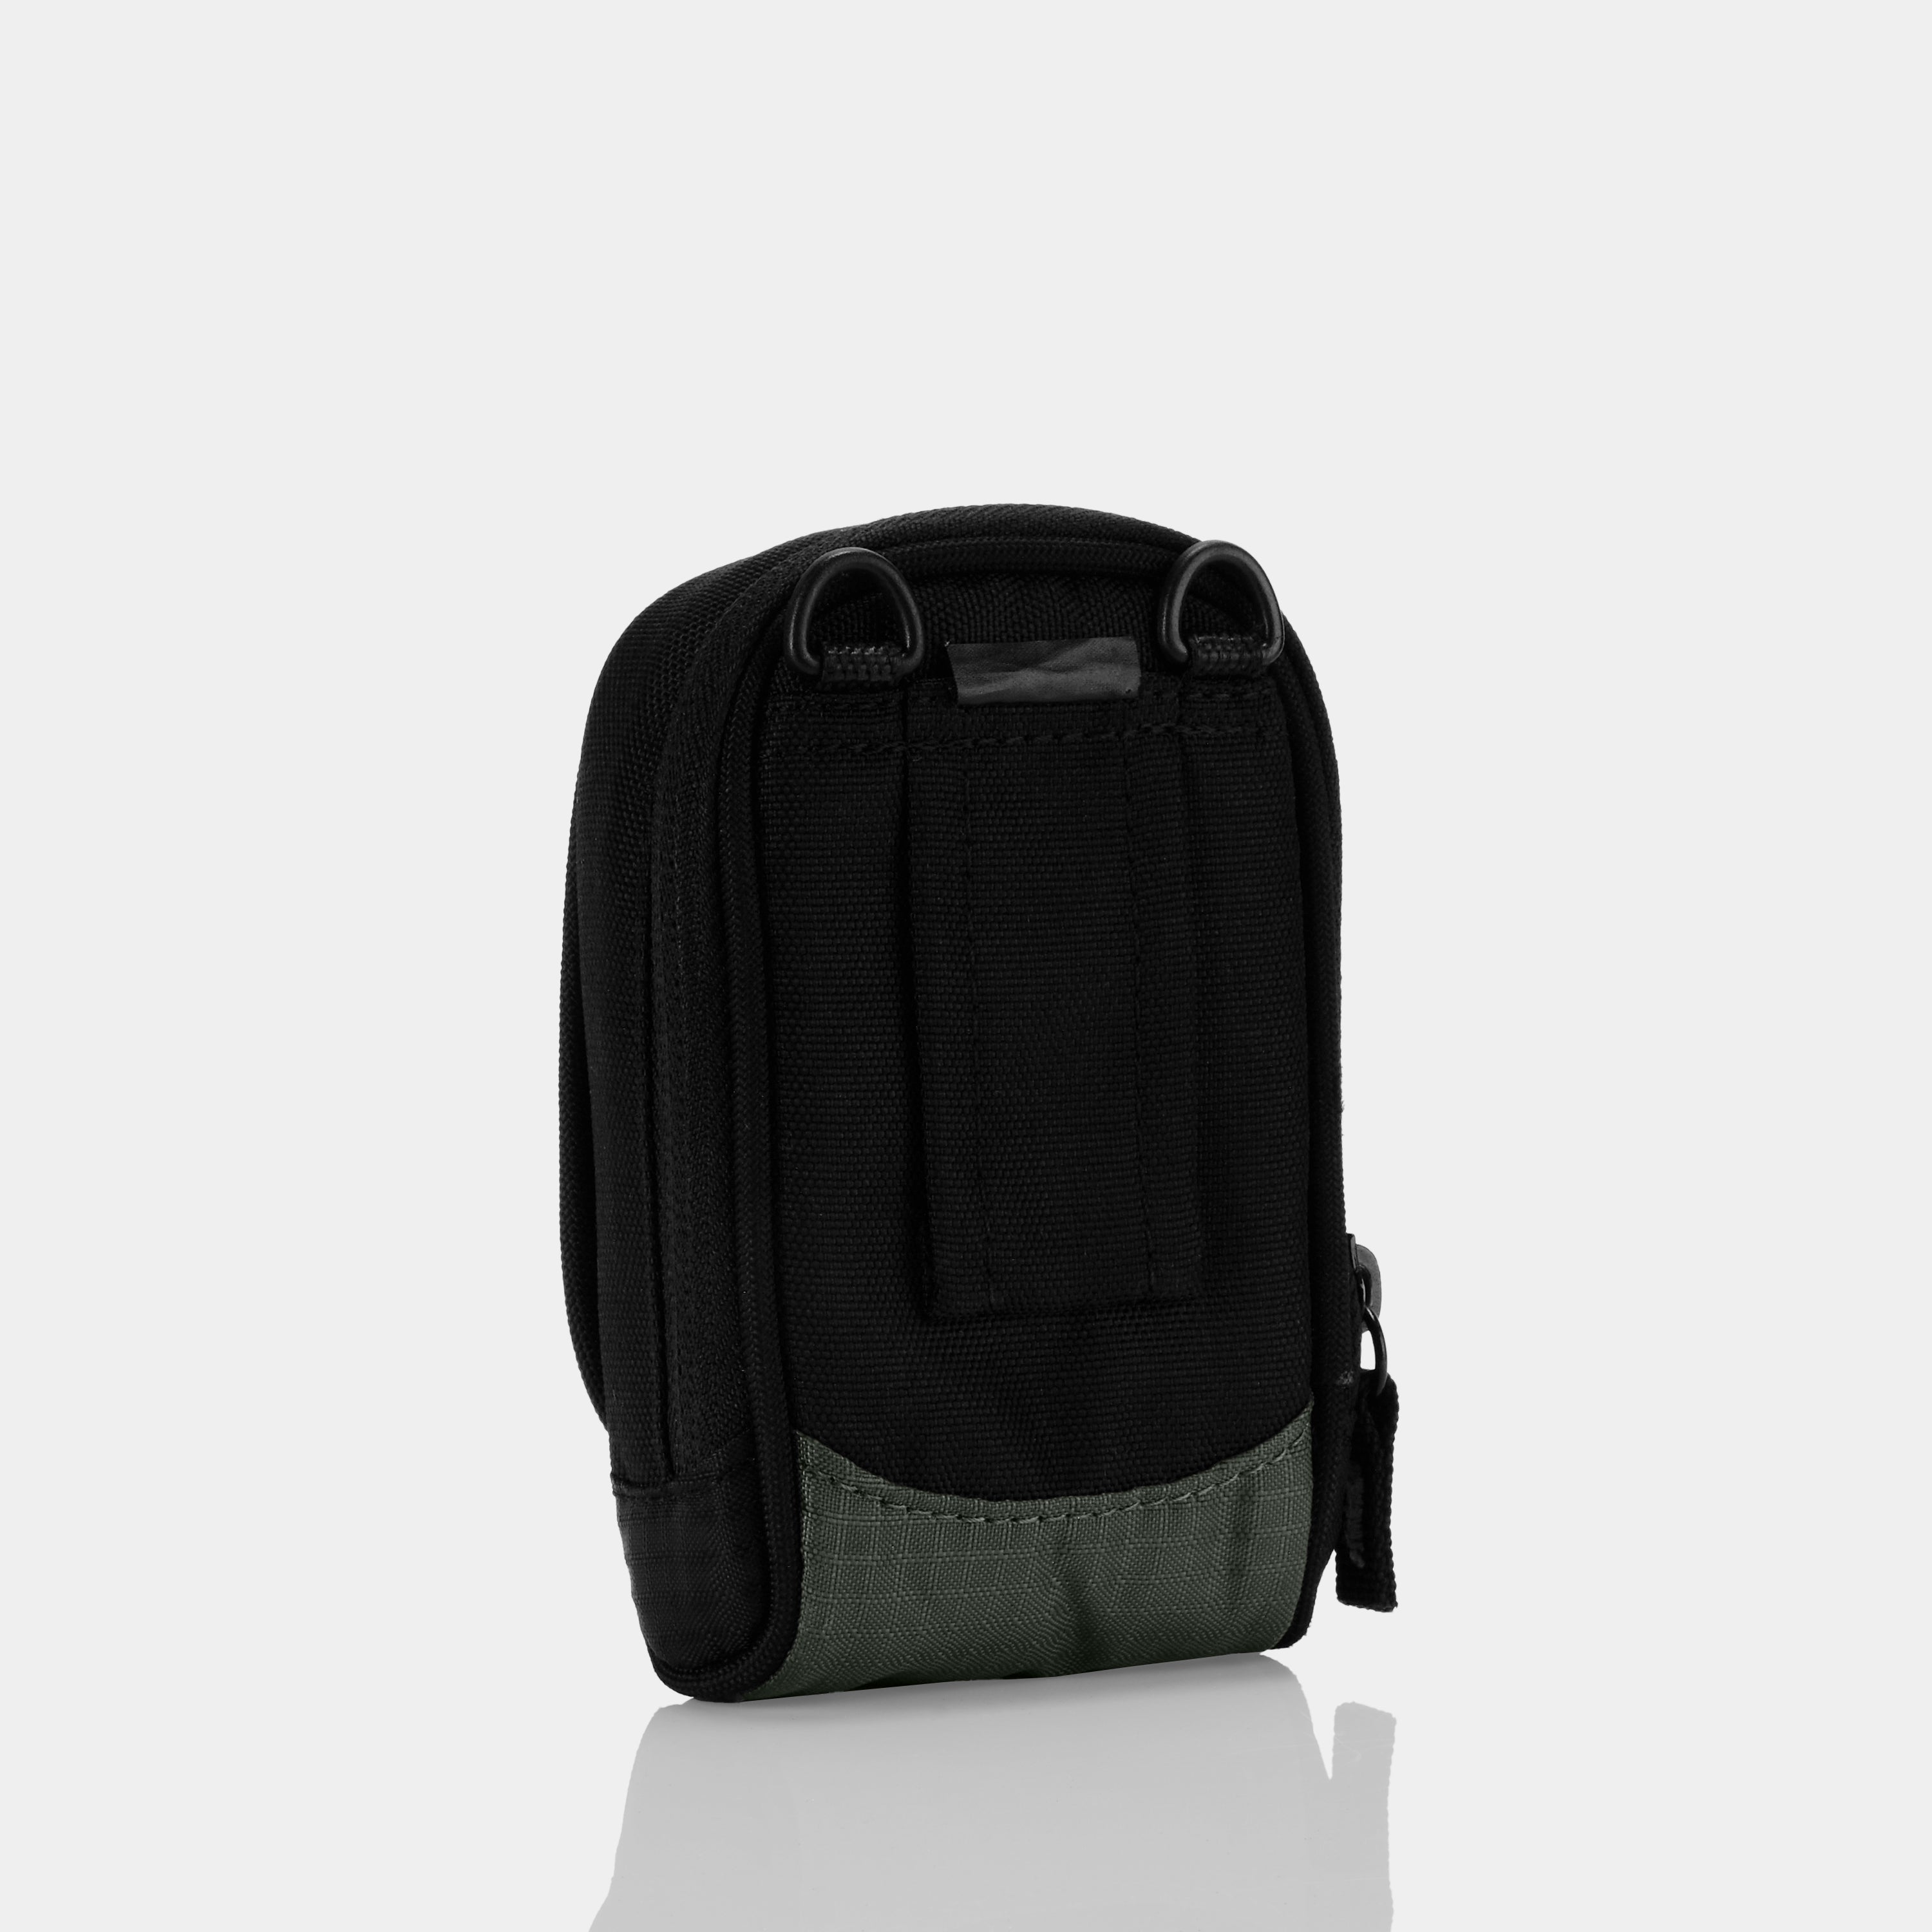 Lowepro Grey Point and Shoot Camera Case